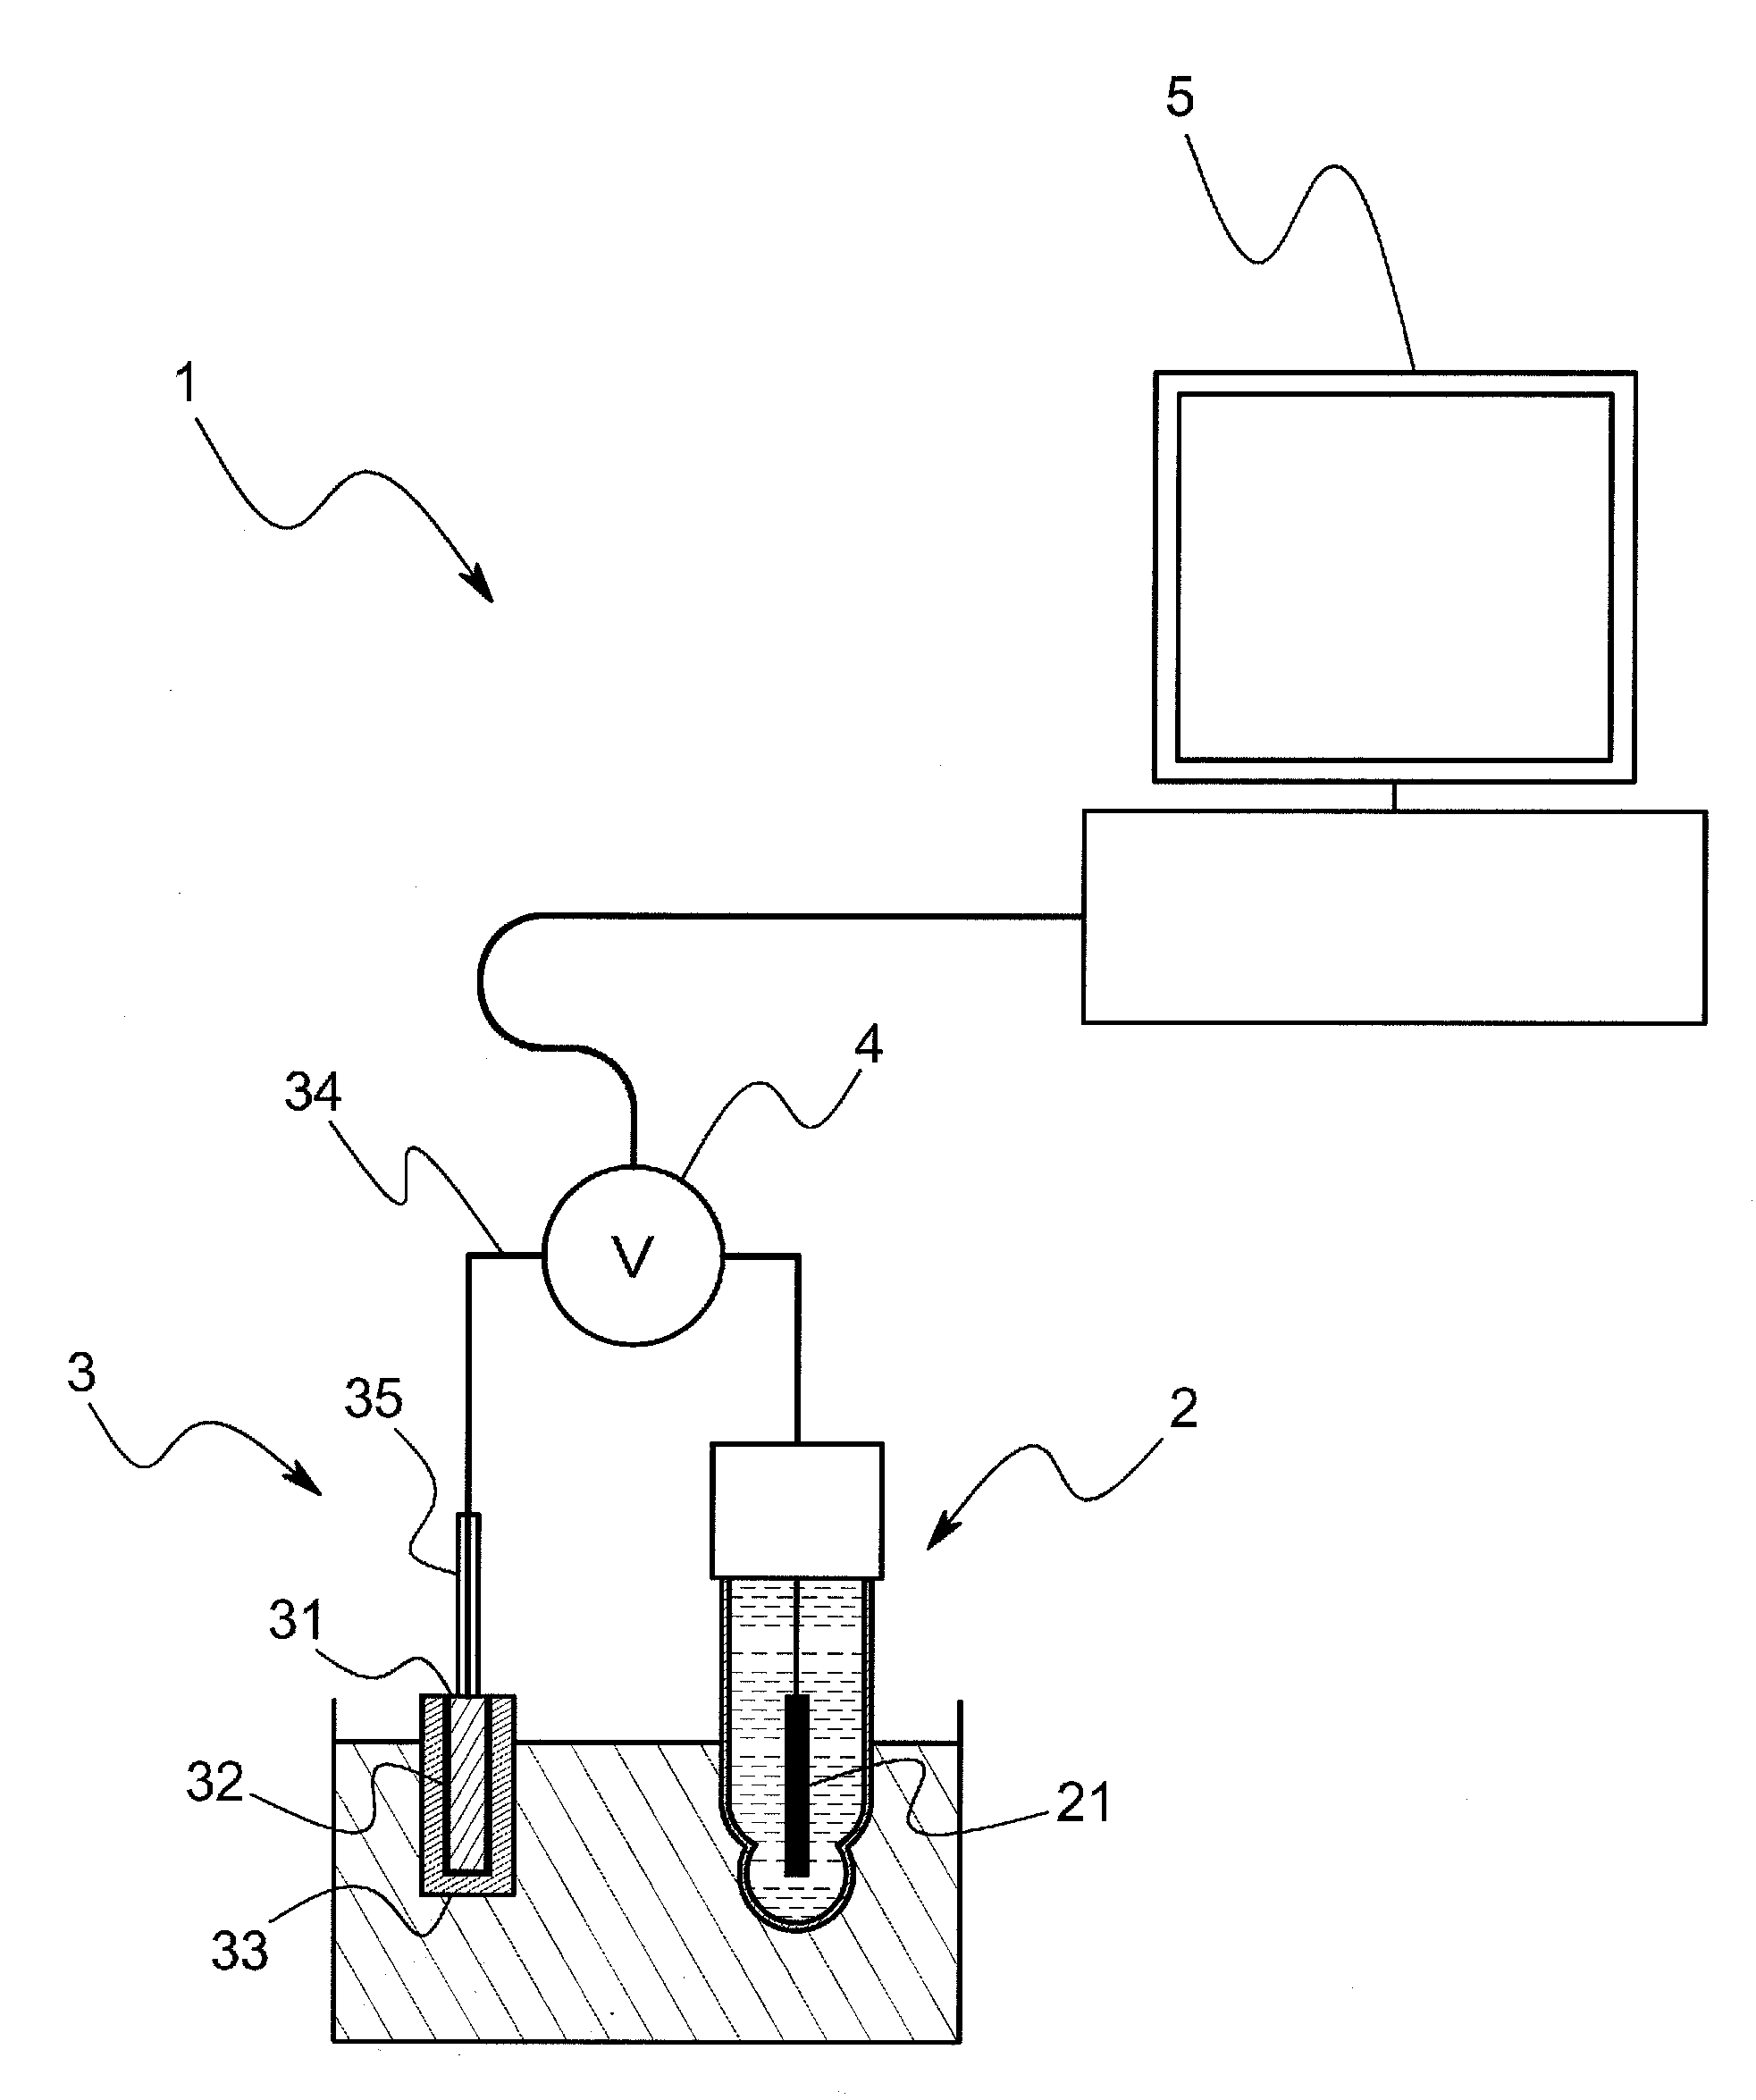 Reference Electrode Coated with Ionic Liquid and Electrochemical Measurement System Using the Reference Electrode